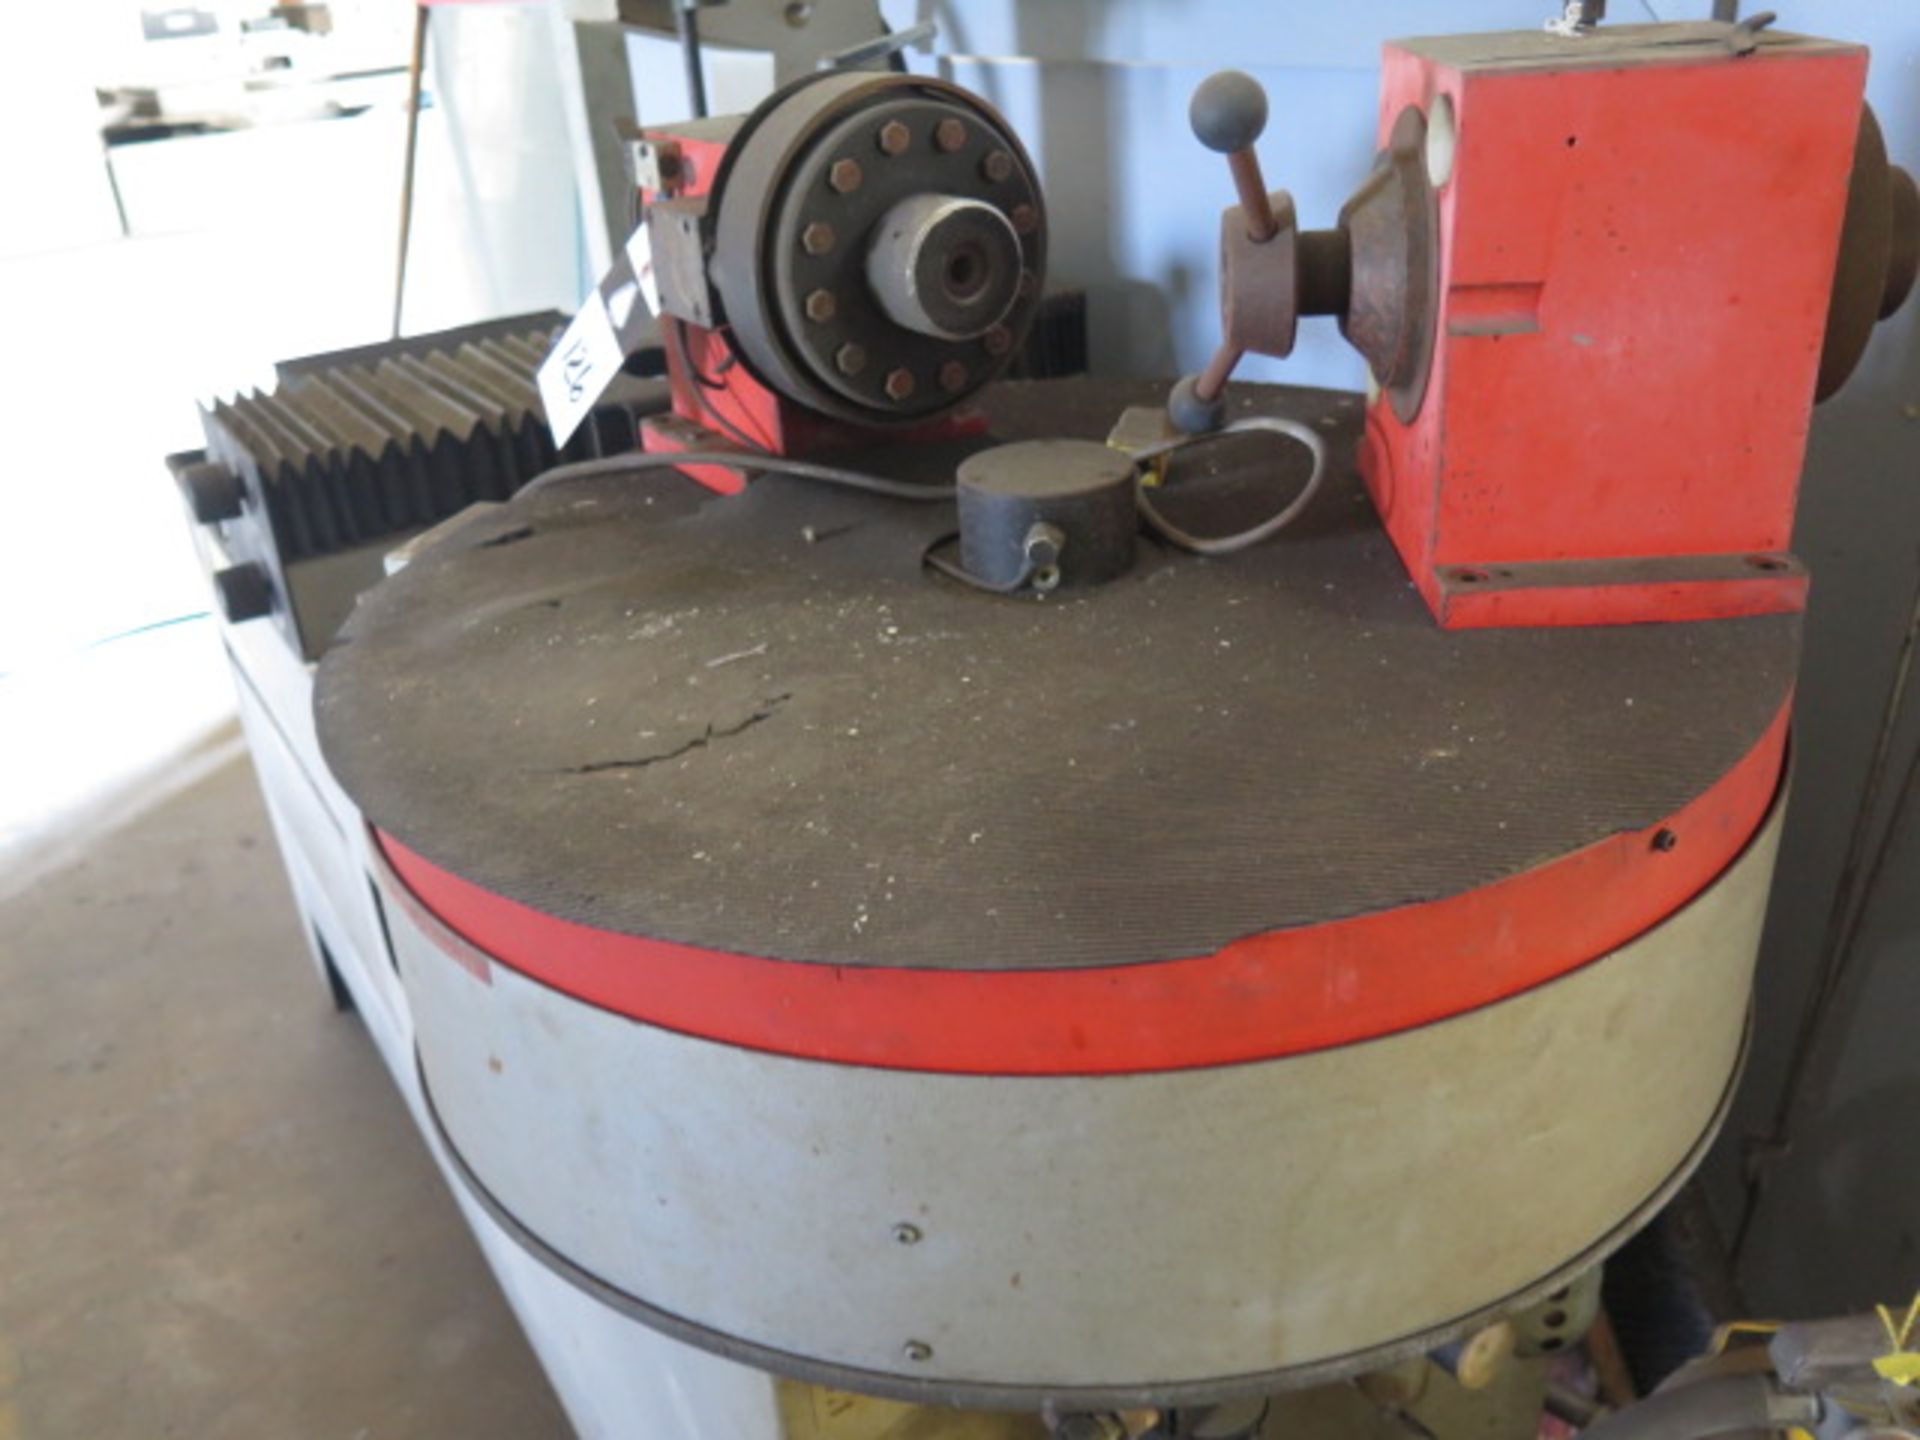 Messma-Kelch “Mini V” Tool Presetter w/ Messma Dig Controls, 40-Taper and 50-Taper, SOLD AS IS - Image 5 of 12